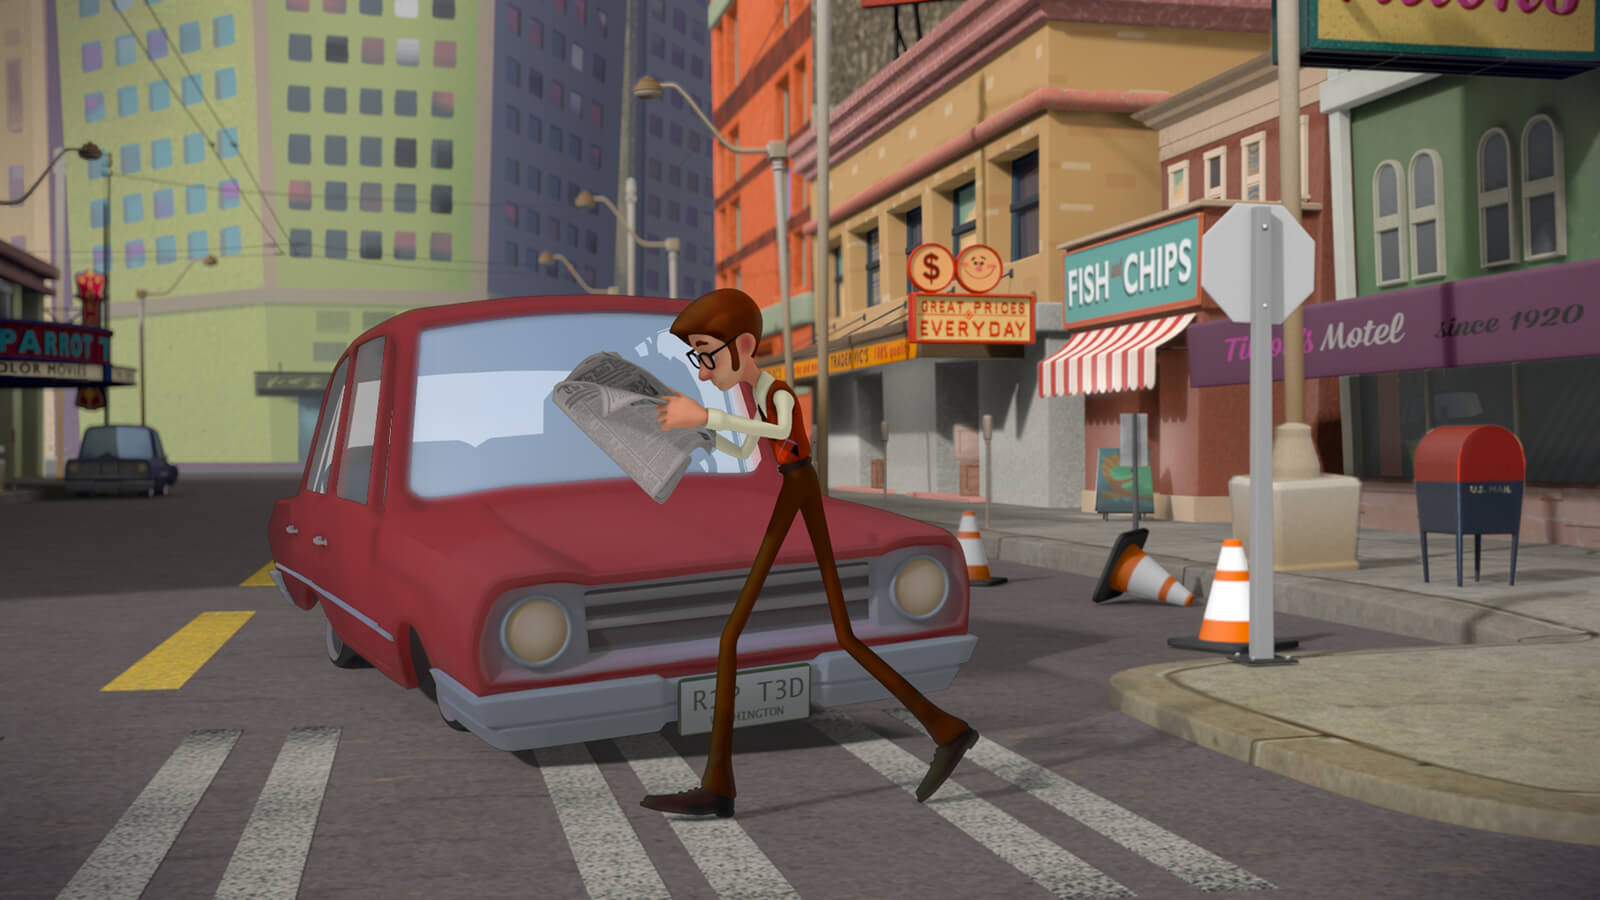 A man in a red argyle sweater reads a newspaper while walking across a street. A red car is about to hit him from the right.